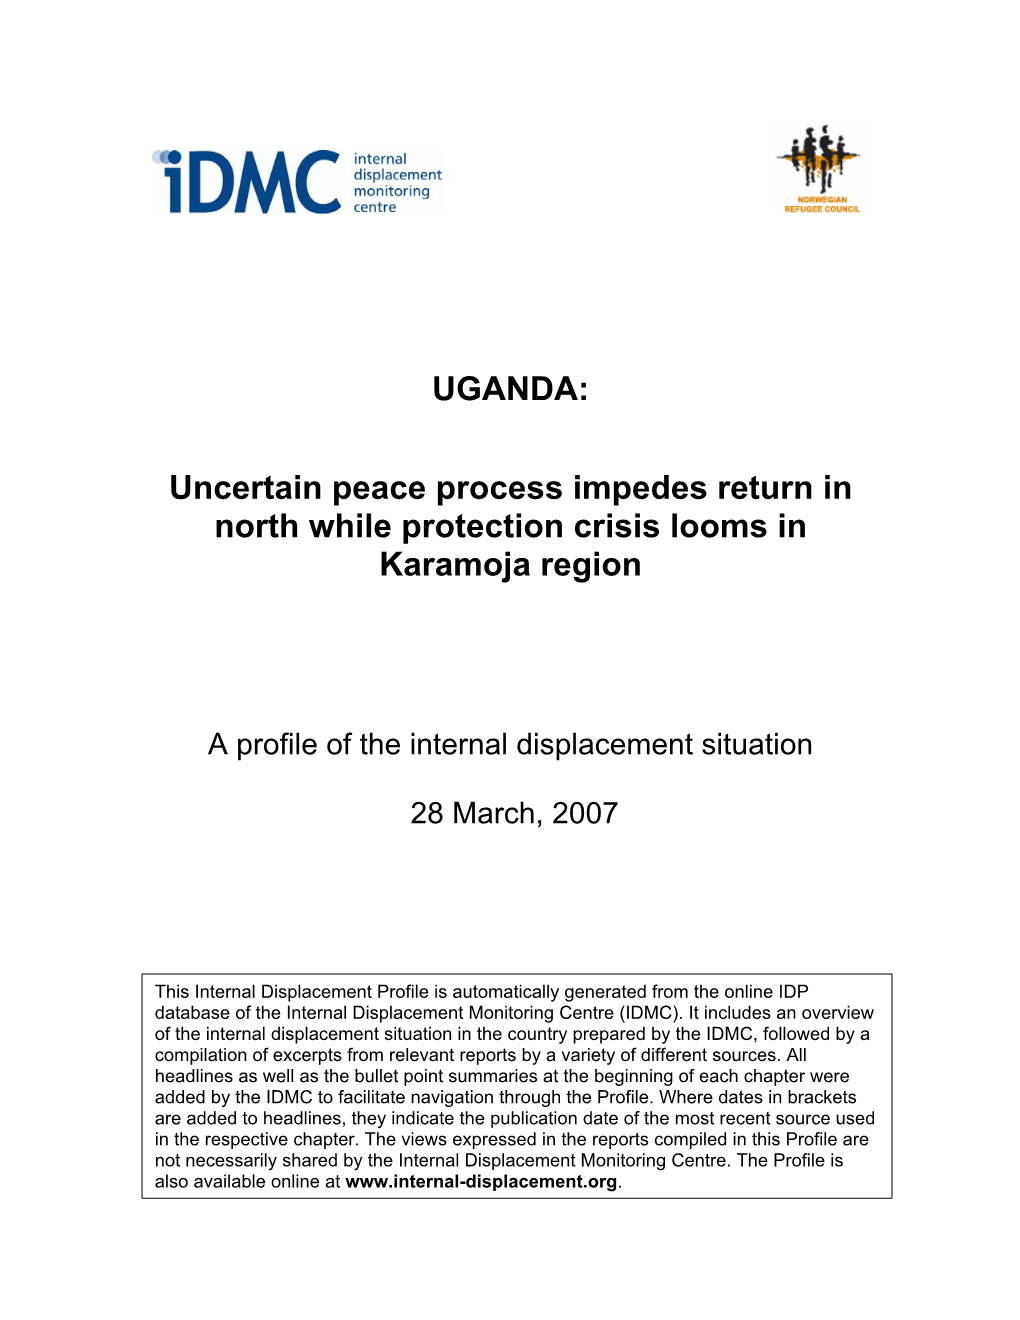 UGANDA: Uncertain Peace Process Impedes Return in North While